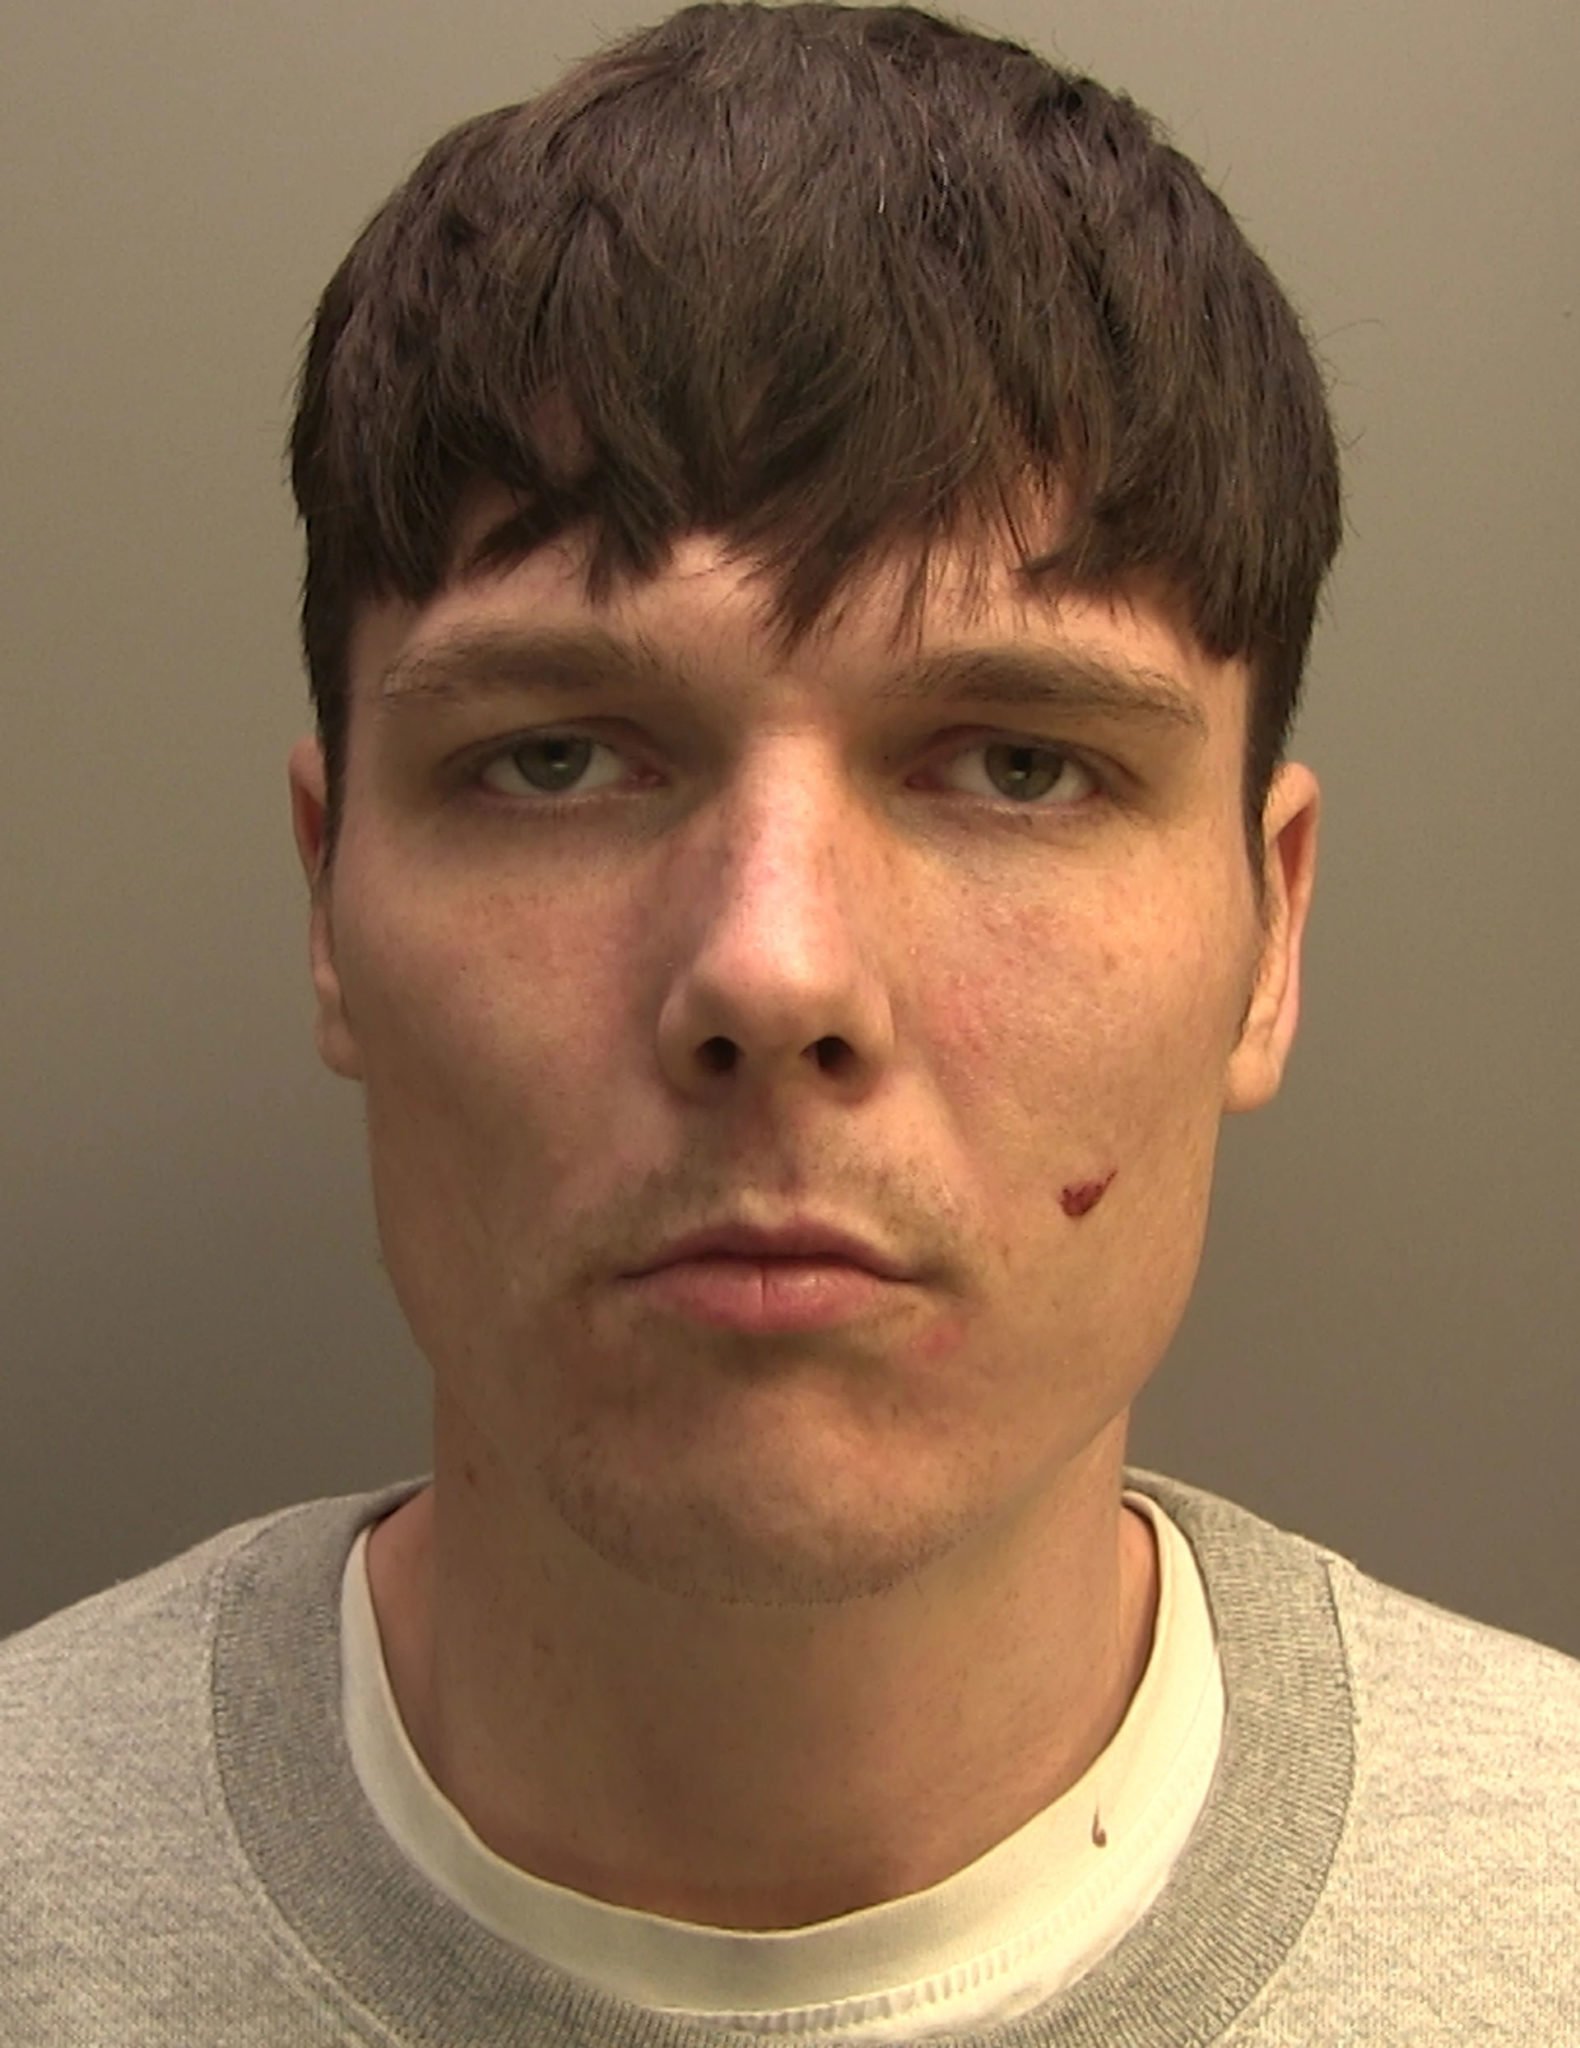 Scott Rowen, 29, previously of Glentworth Crescent in Skegness, was sentenced for manslaughter after admitting responsibility for killing Jordan Siree more than a year ago.